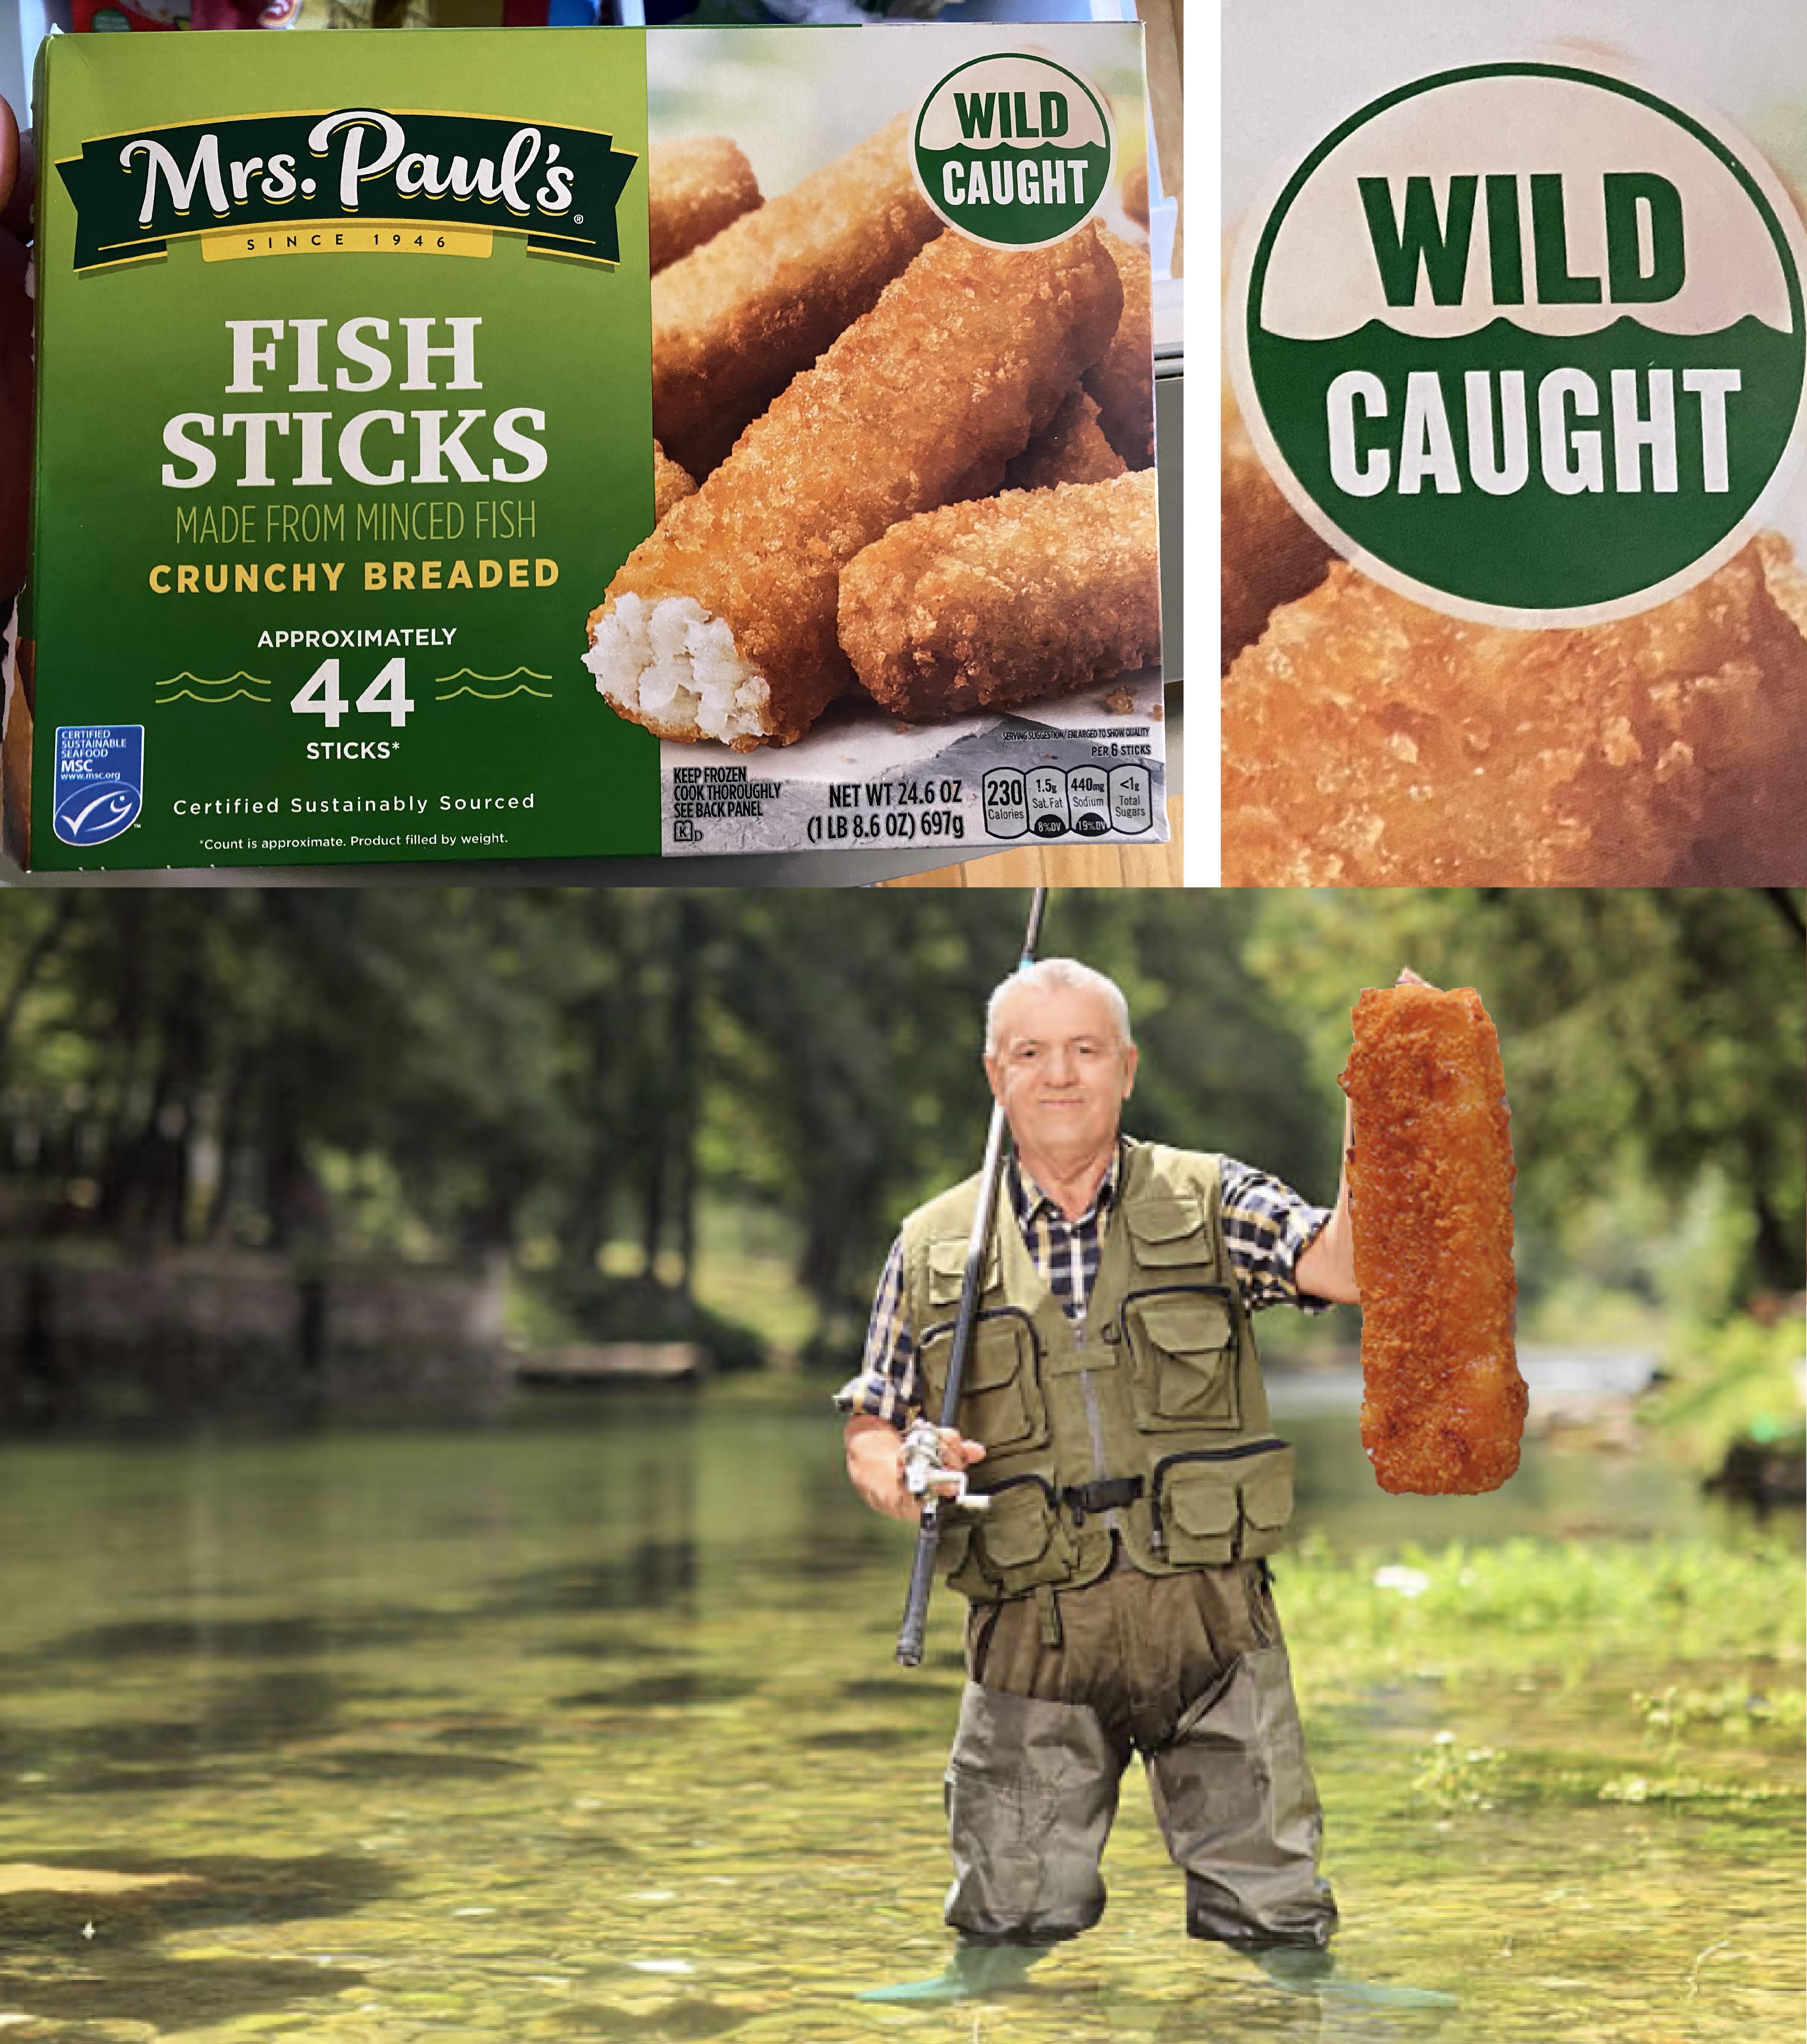 dank and savage memes - fisherman vest - 10 Mrs. Paul's The Fish Sticks Made From Minced Fish Crunchy Breaded Approximately 44 Sticks Certified Sestaure Wild Caught Qu Net Wit 246 07 230 2960 Wild Caught